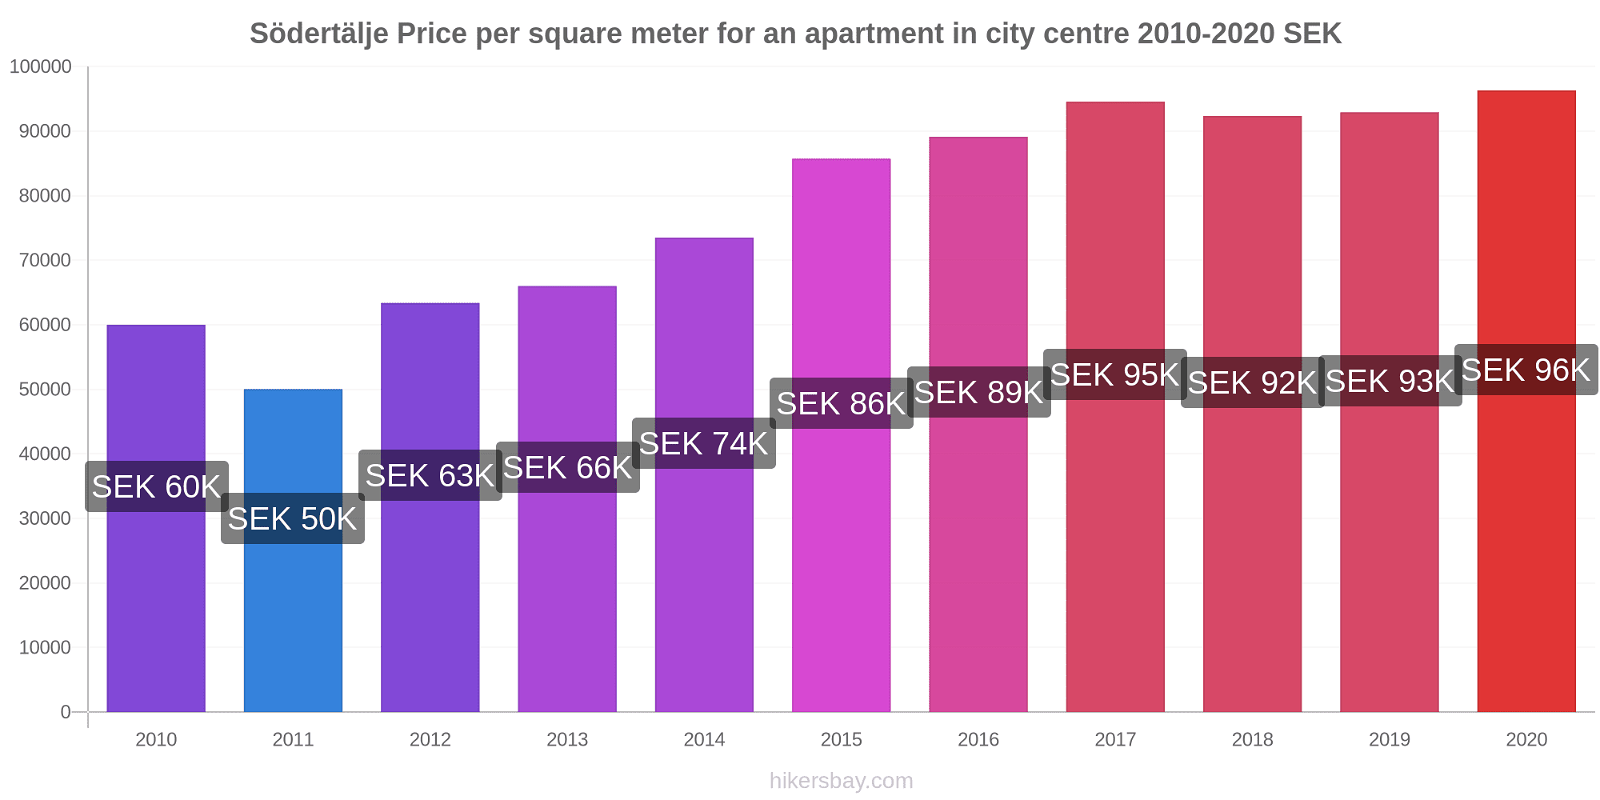 Södertälje price changes Price per square meter for an apartment in city centre hikersbay.com